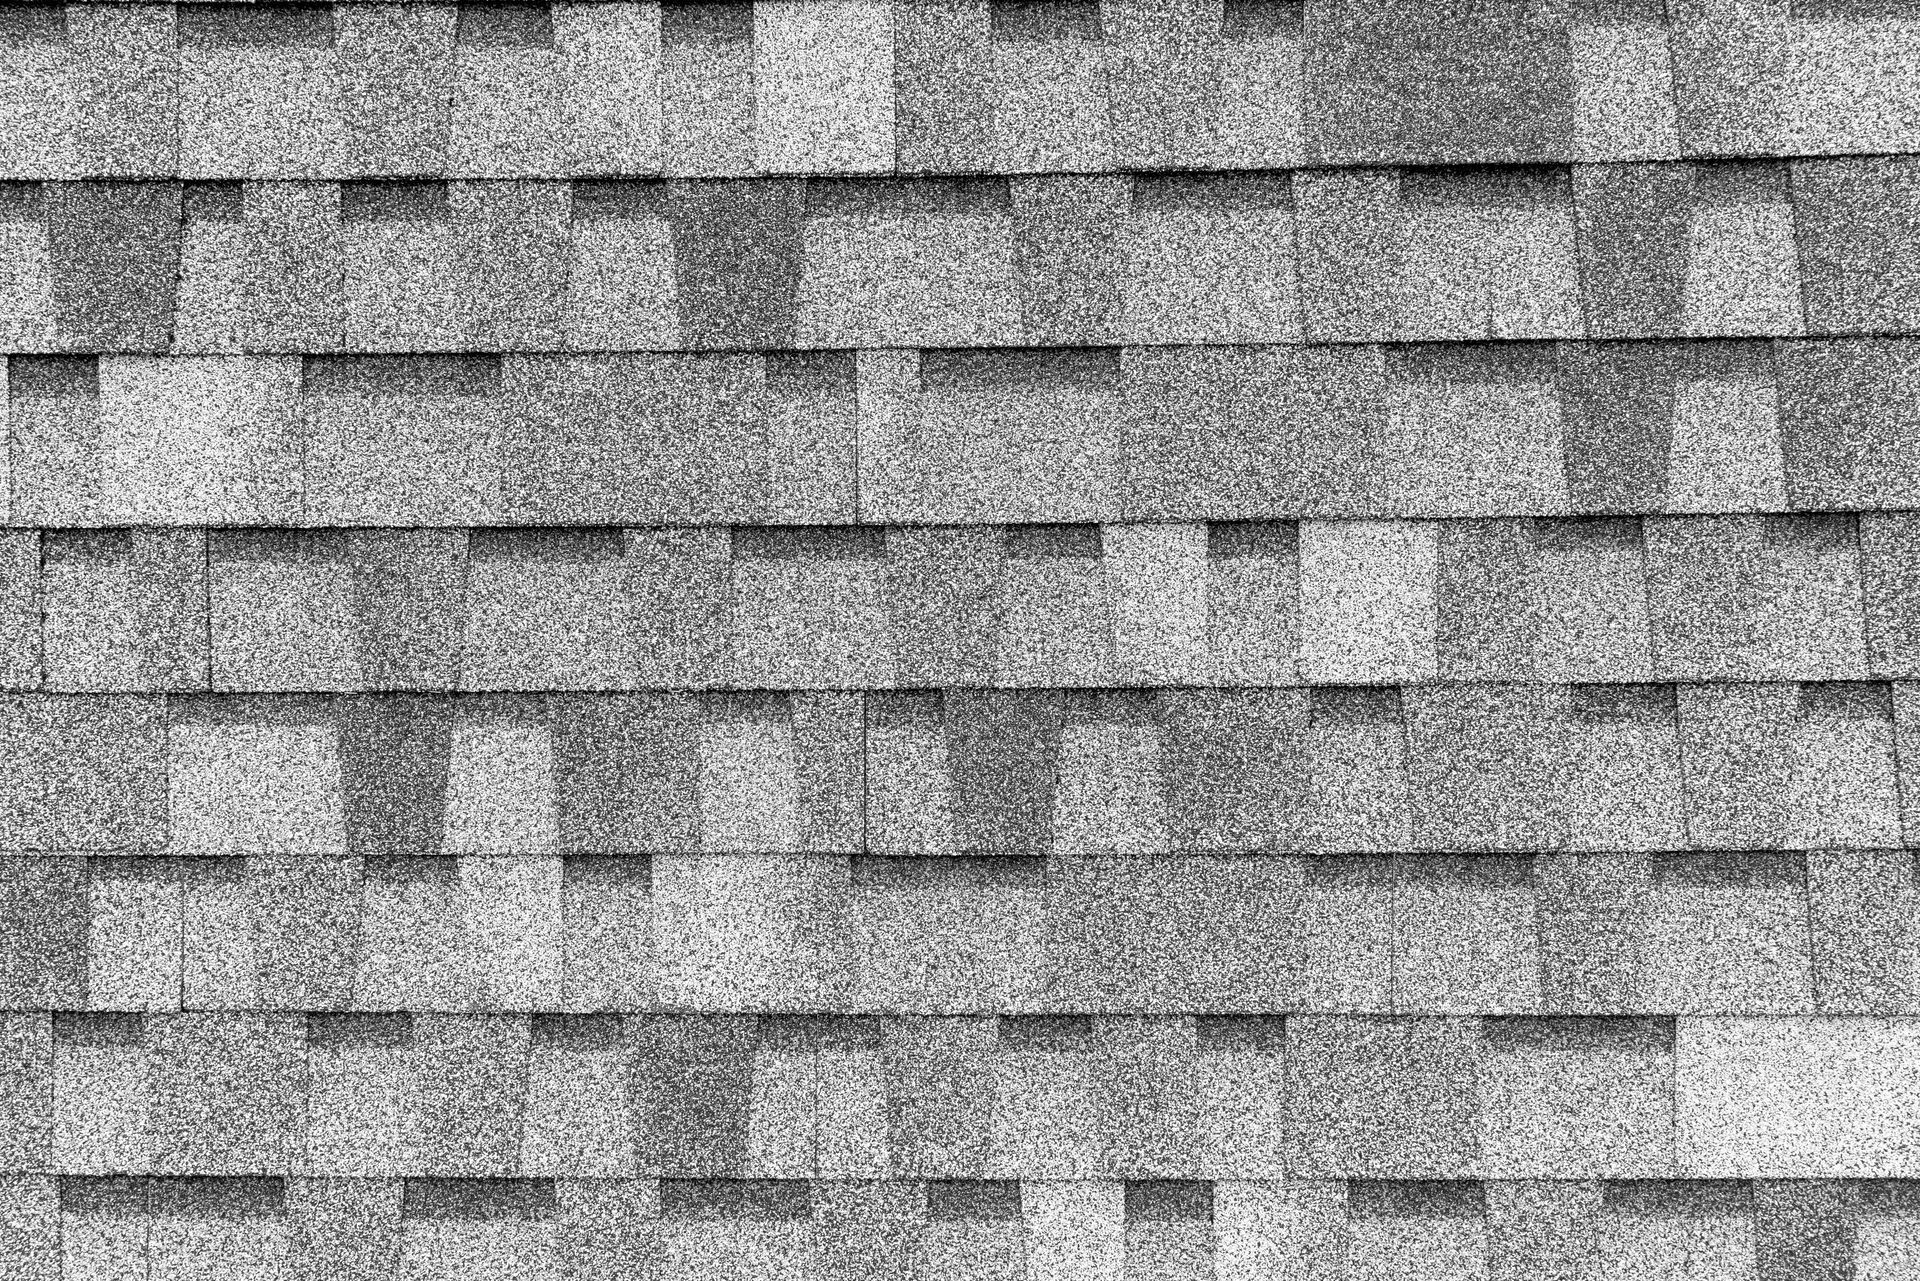 After picture showing beautiful new shingles ready to protect a home from the elements